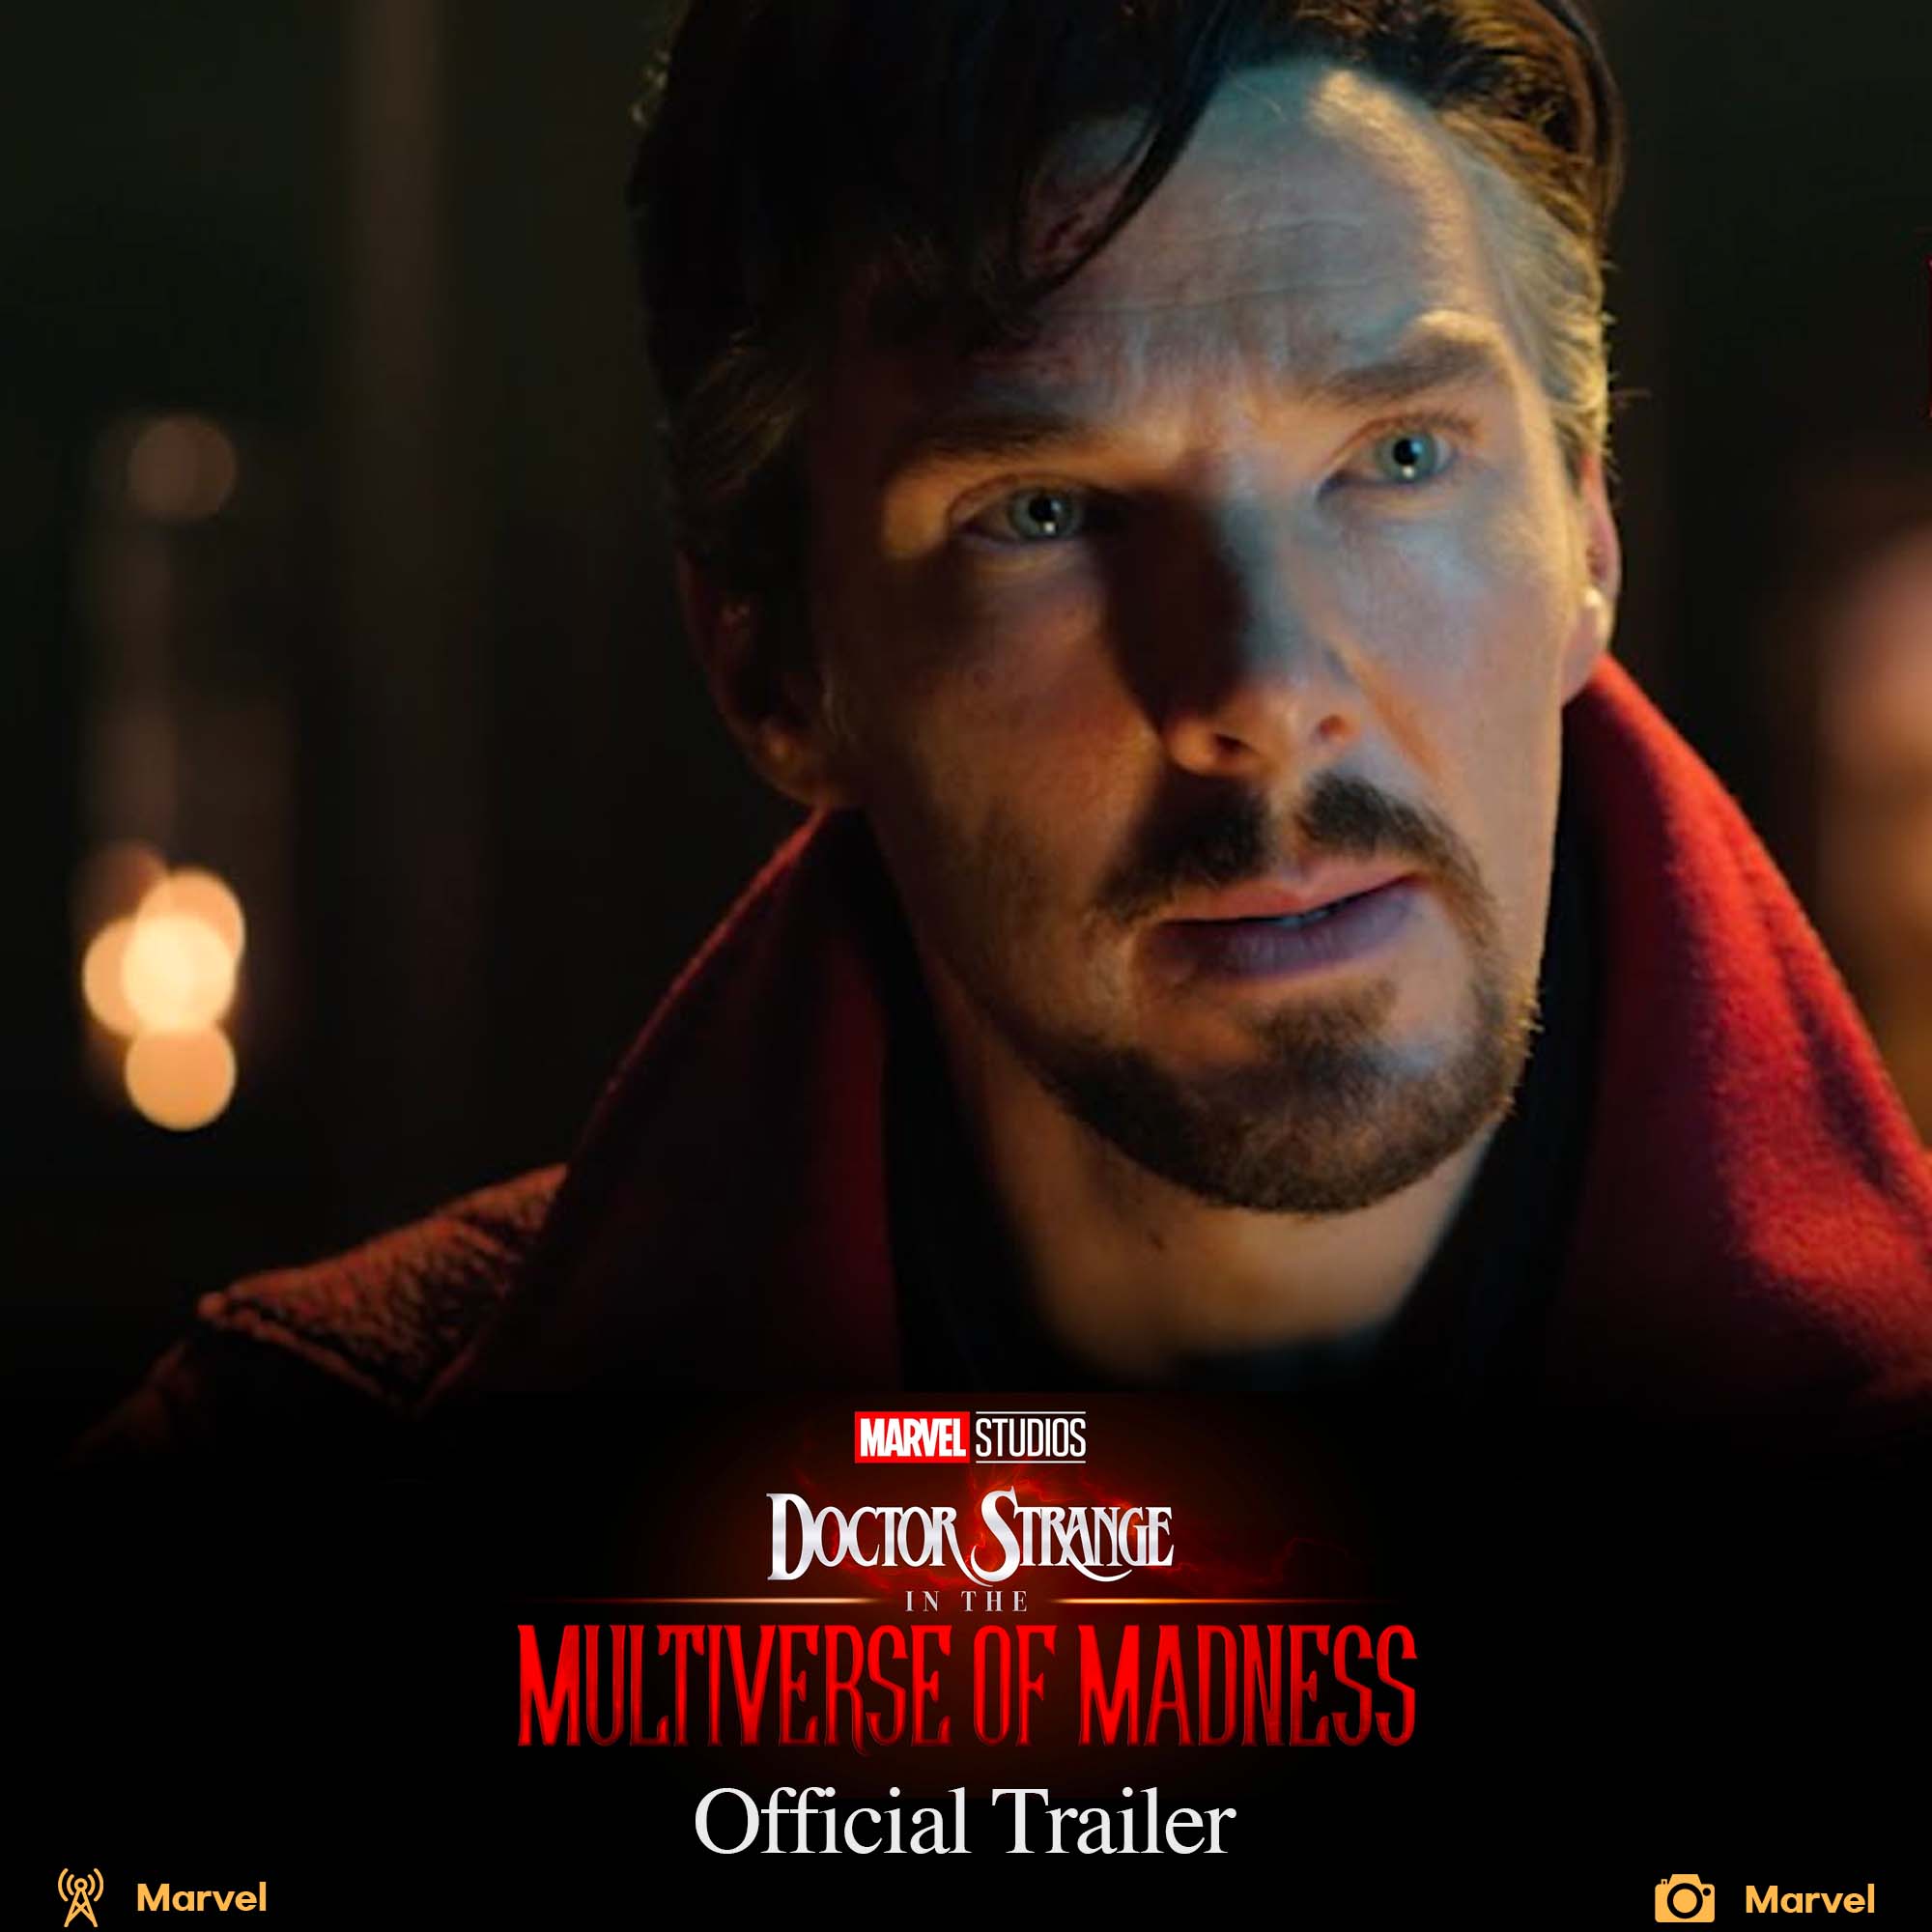 Marvel released first trailer for Doctor Strange in the Multiverse of Madness